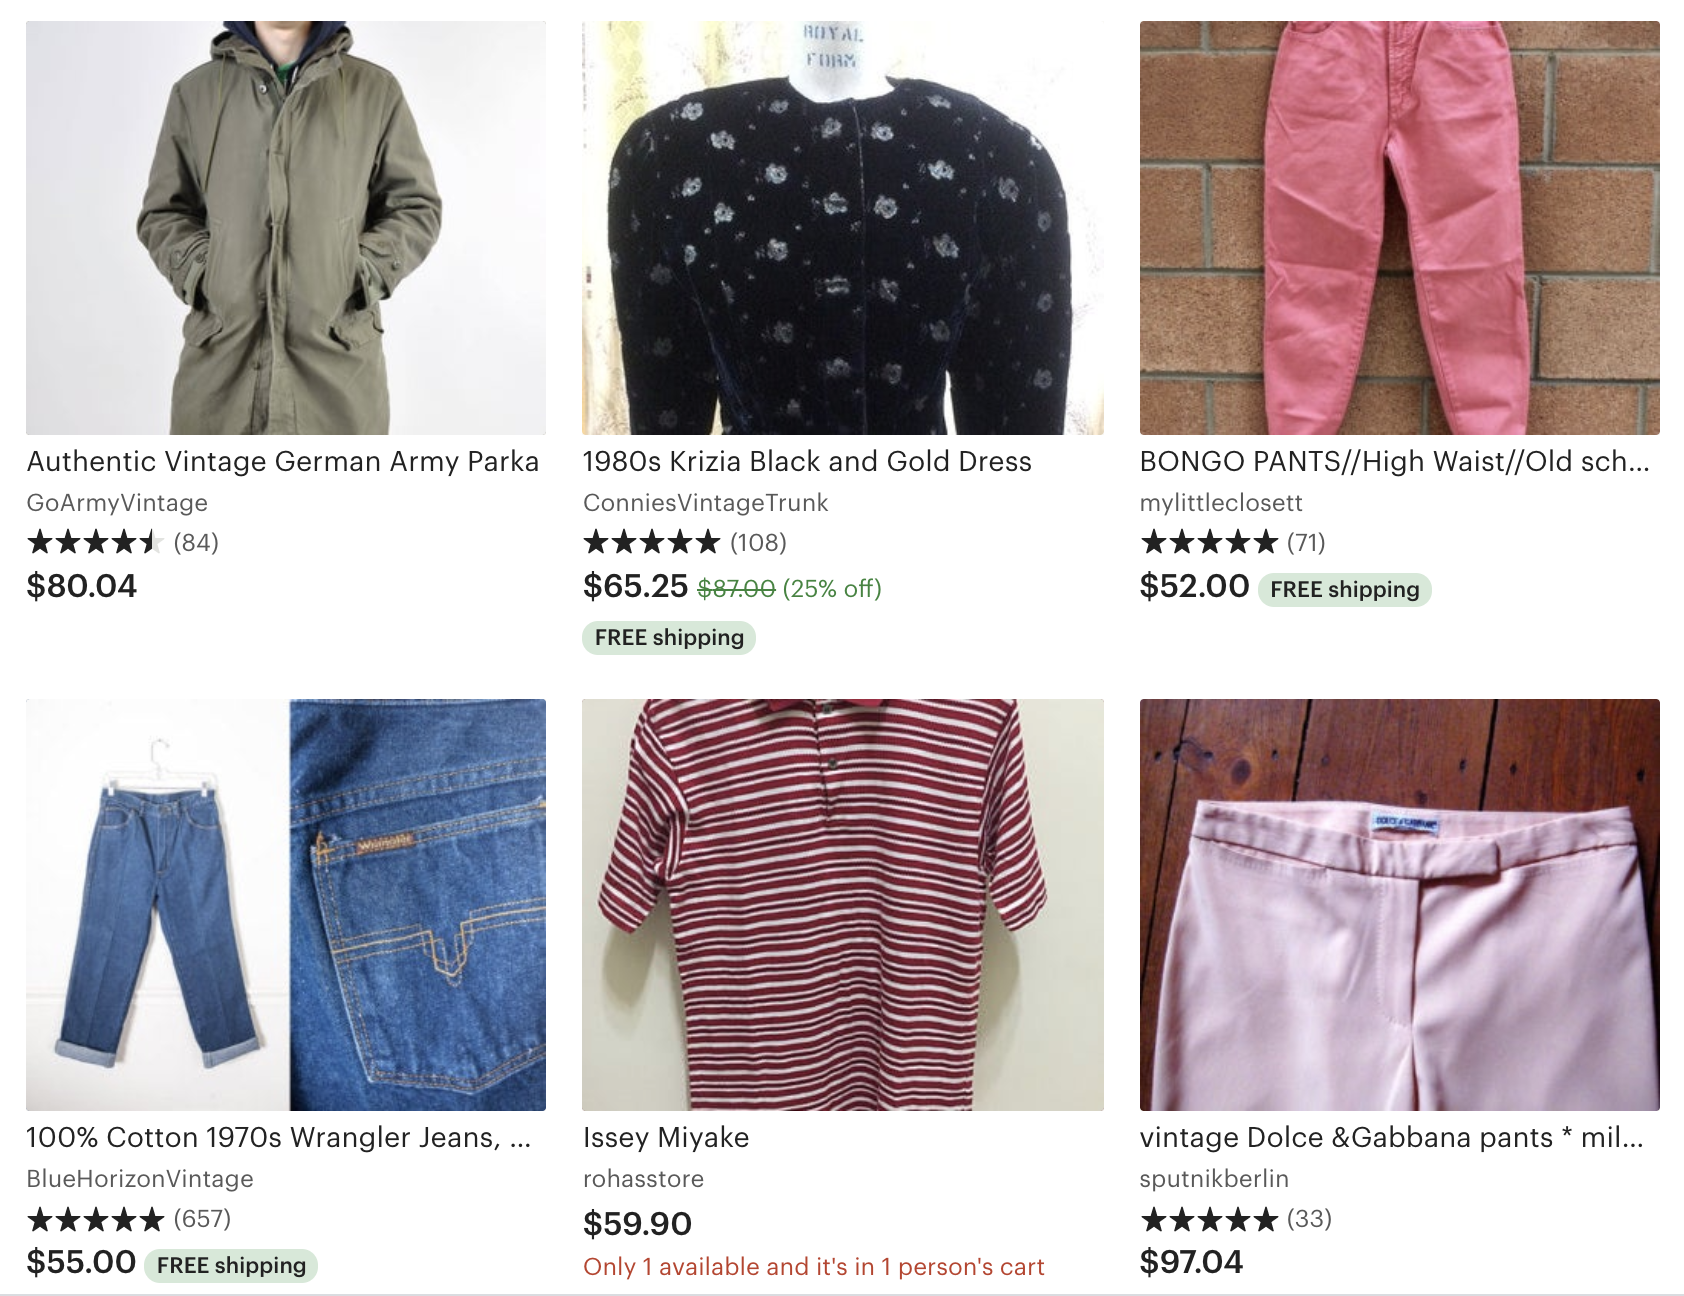 examples of vintage clothing on Etsy